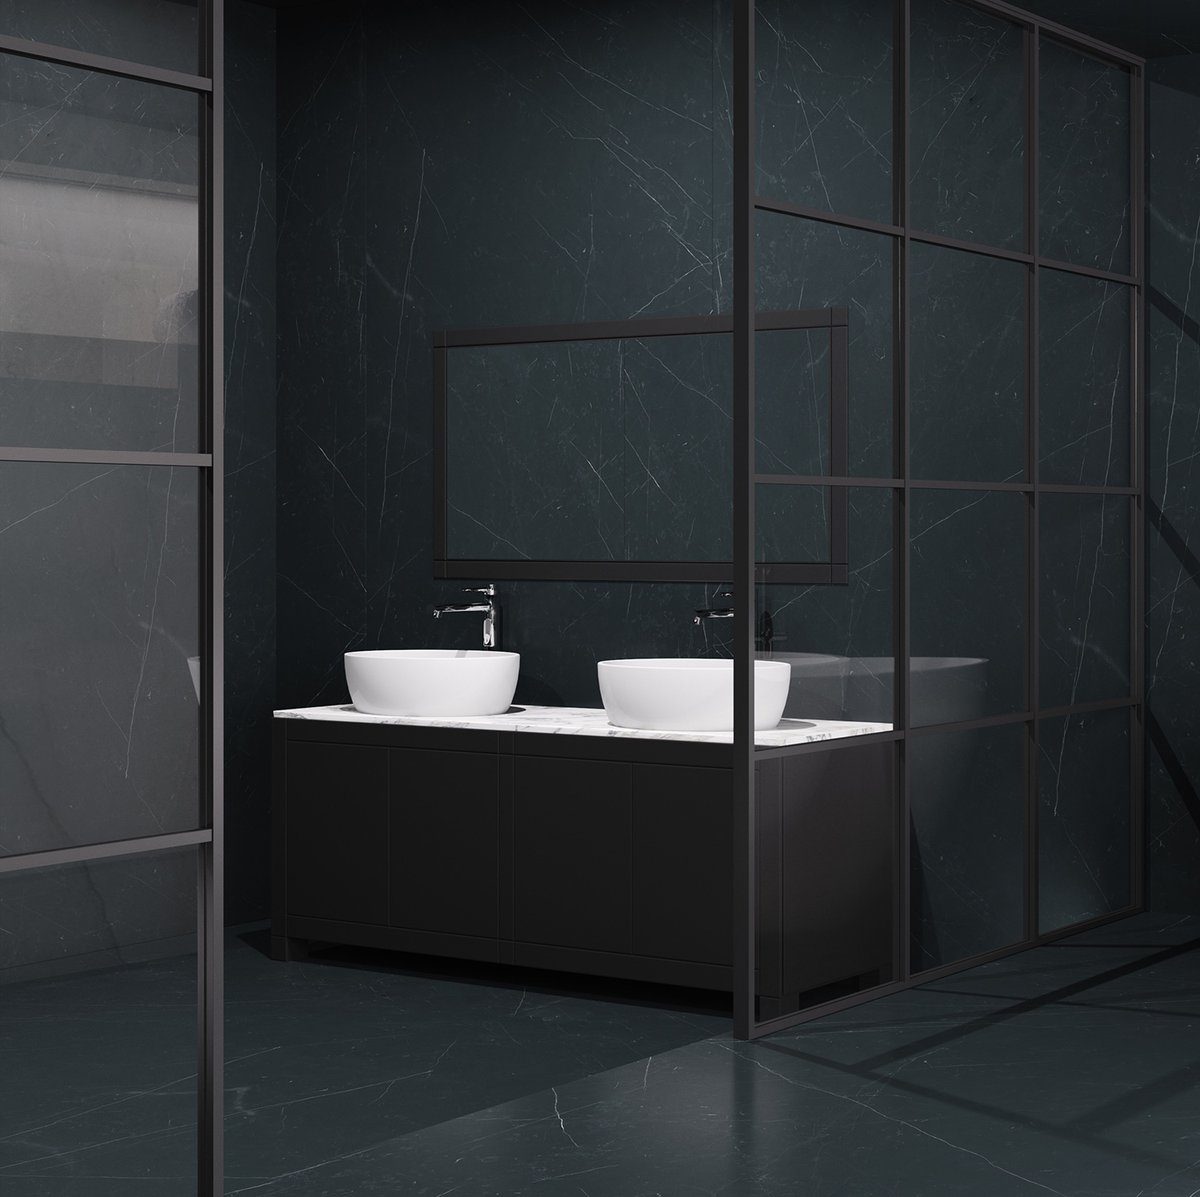 The art deco look for bathrooms is very on trend. With CRL Quadrato, The metal framed glazing gives the bathroom a contemporary feel, adding a hint of industrial style. Find out more spr.ly/6014VOYnr . #bathrooms #artdeco #interiordesign